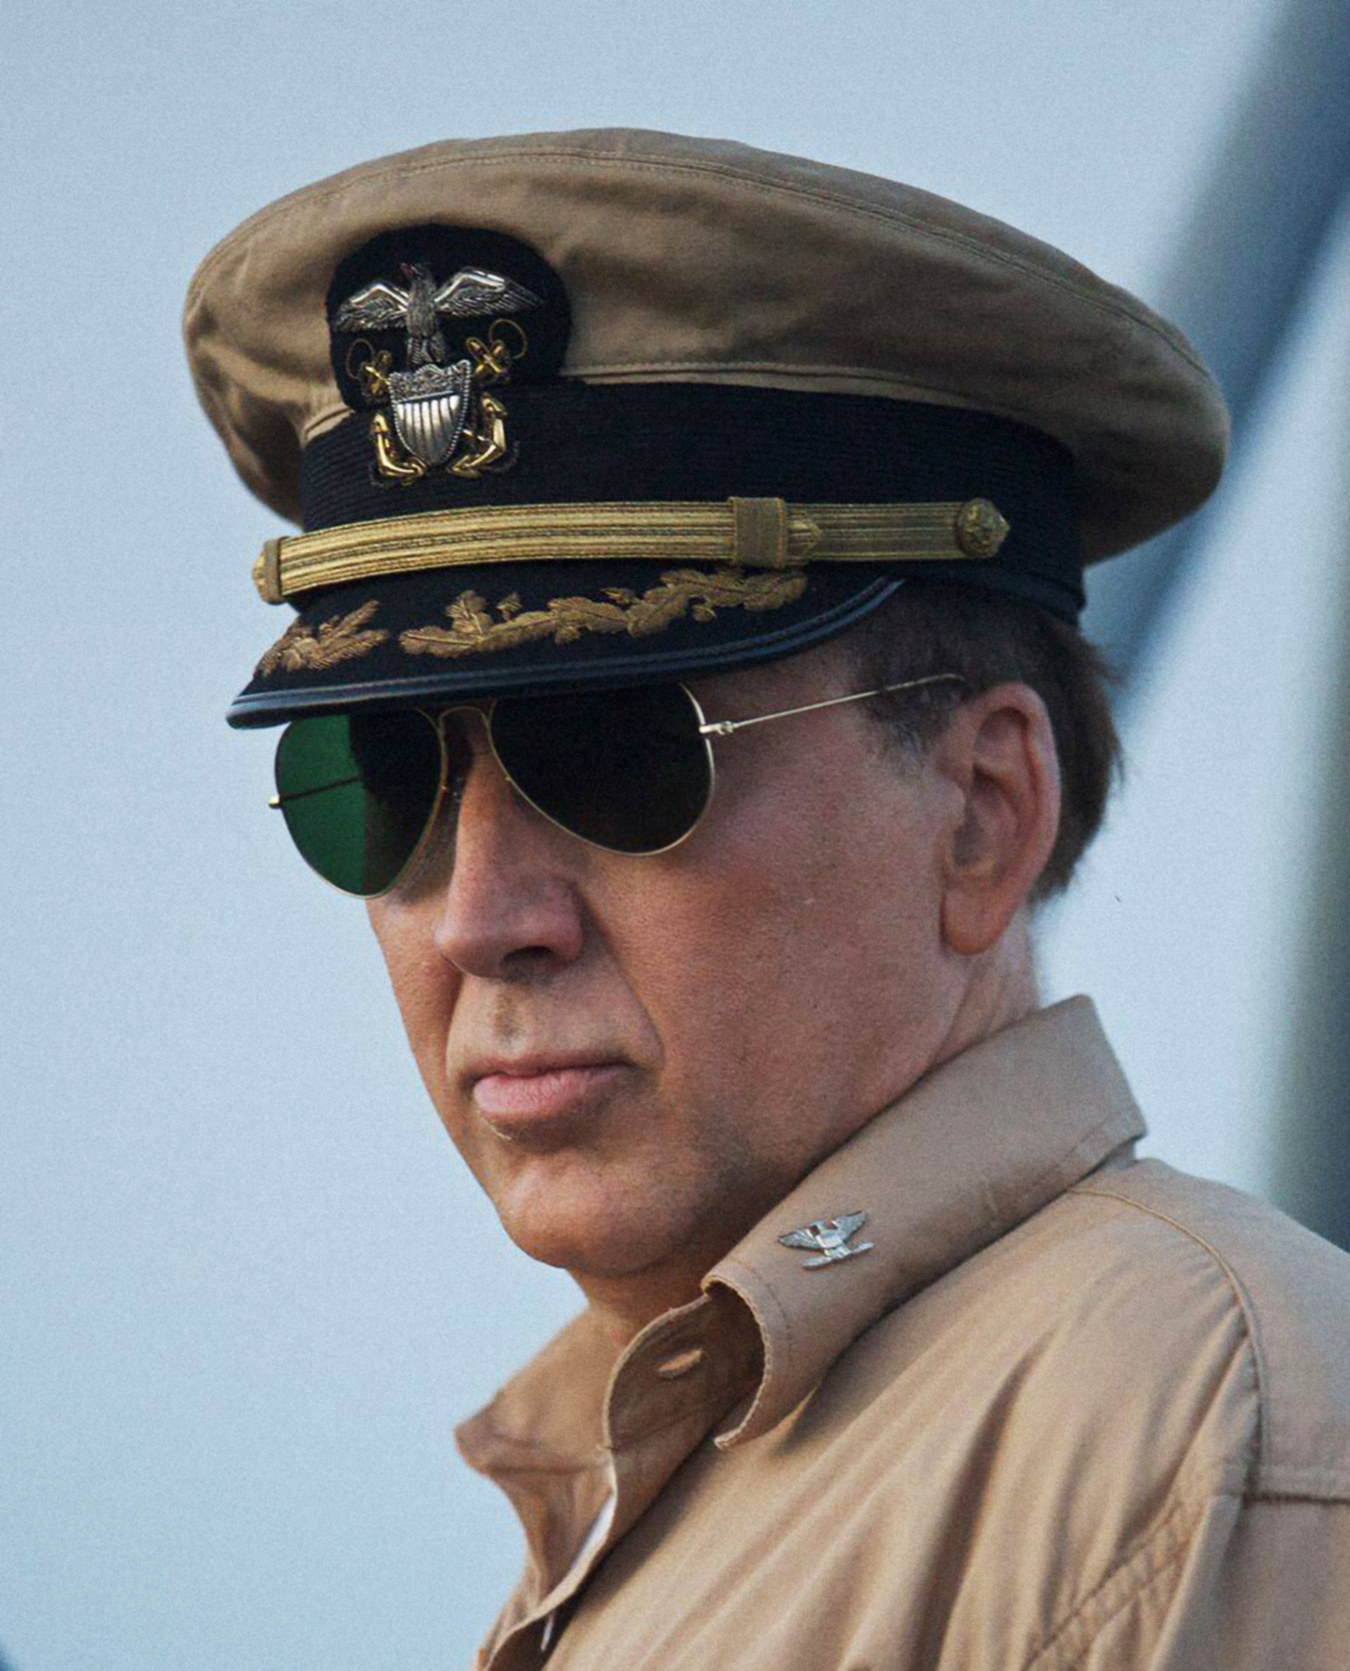 Nicholas Cage as a military officer